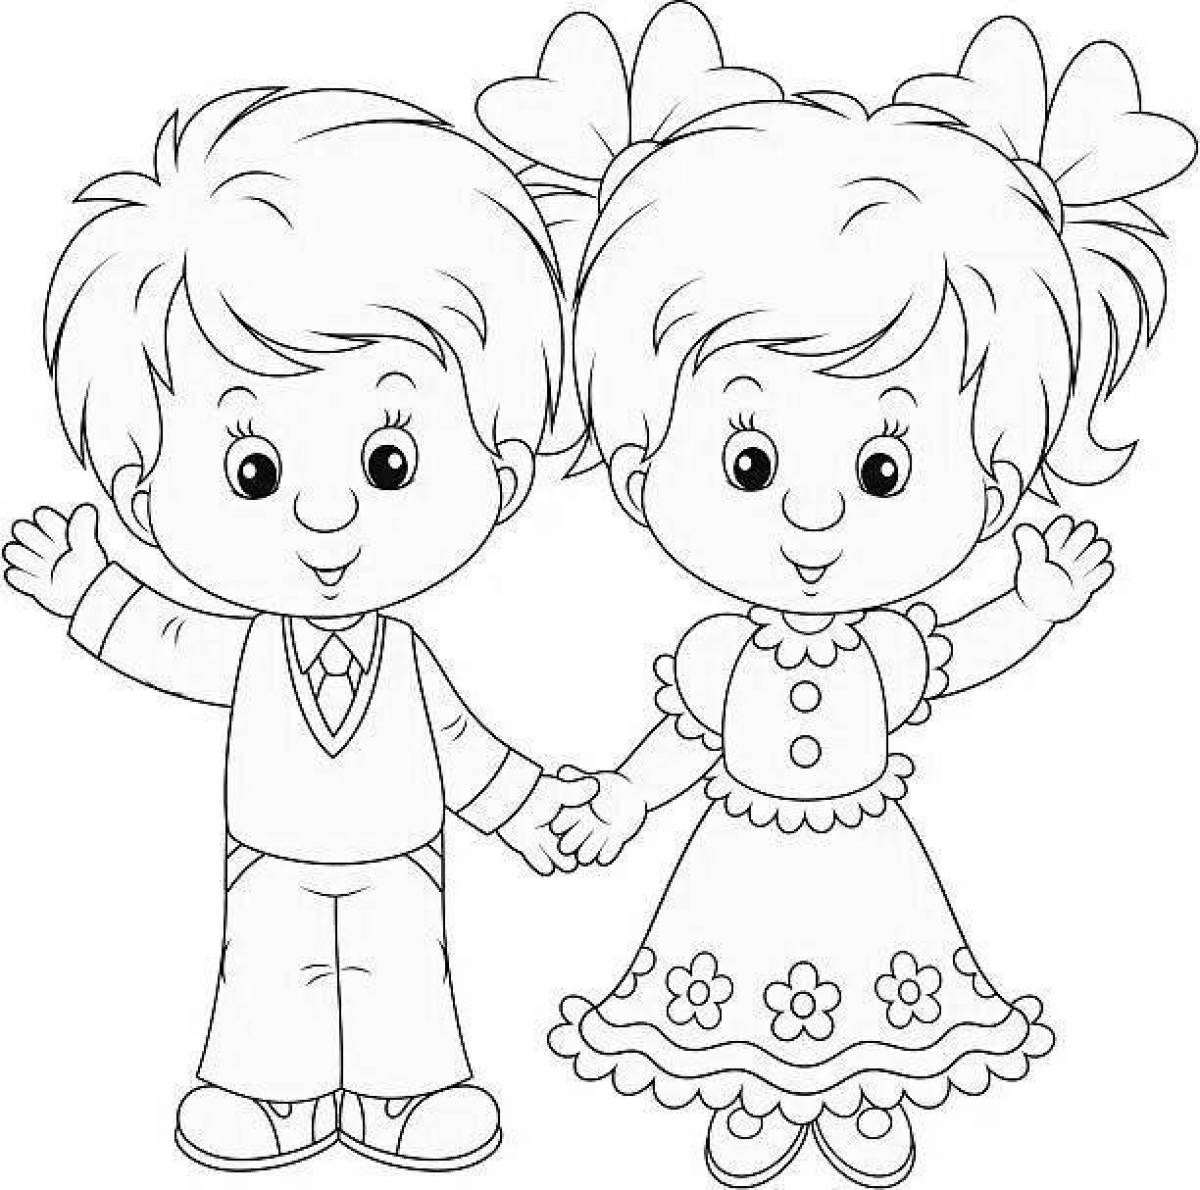 Boys and girls pictures for kids #2